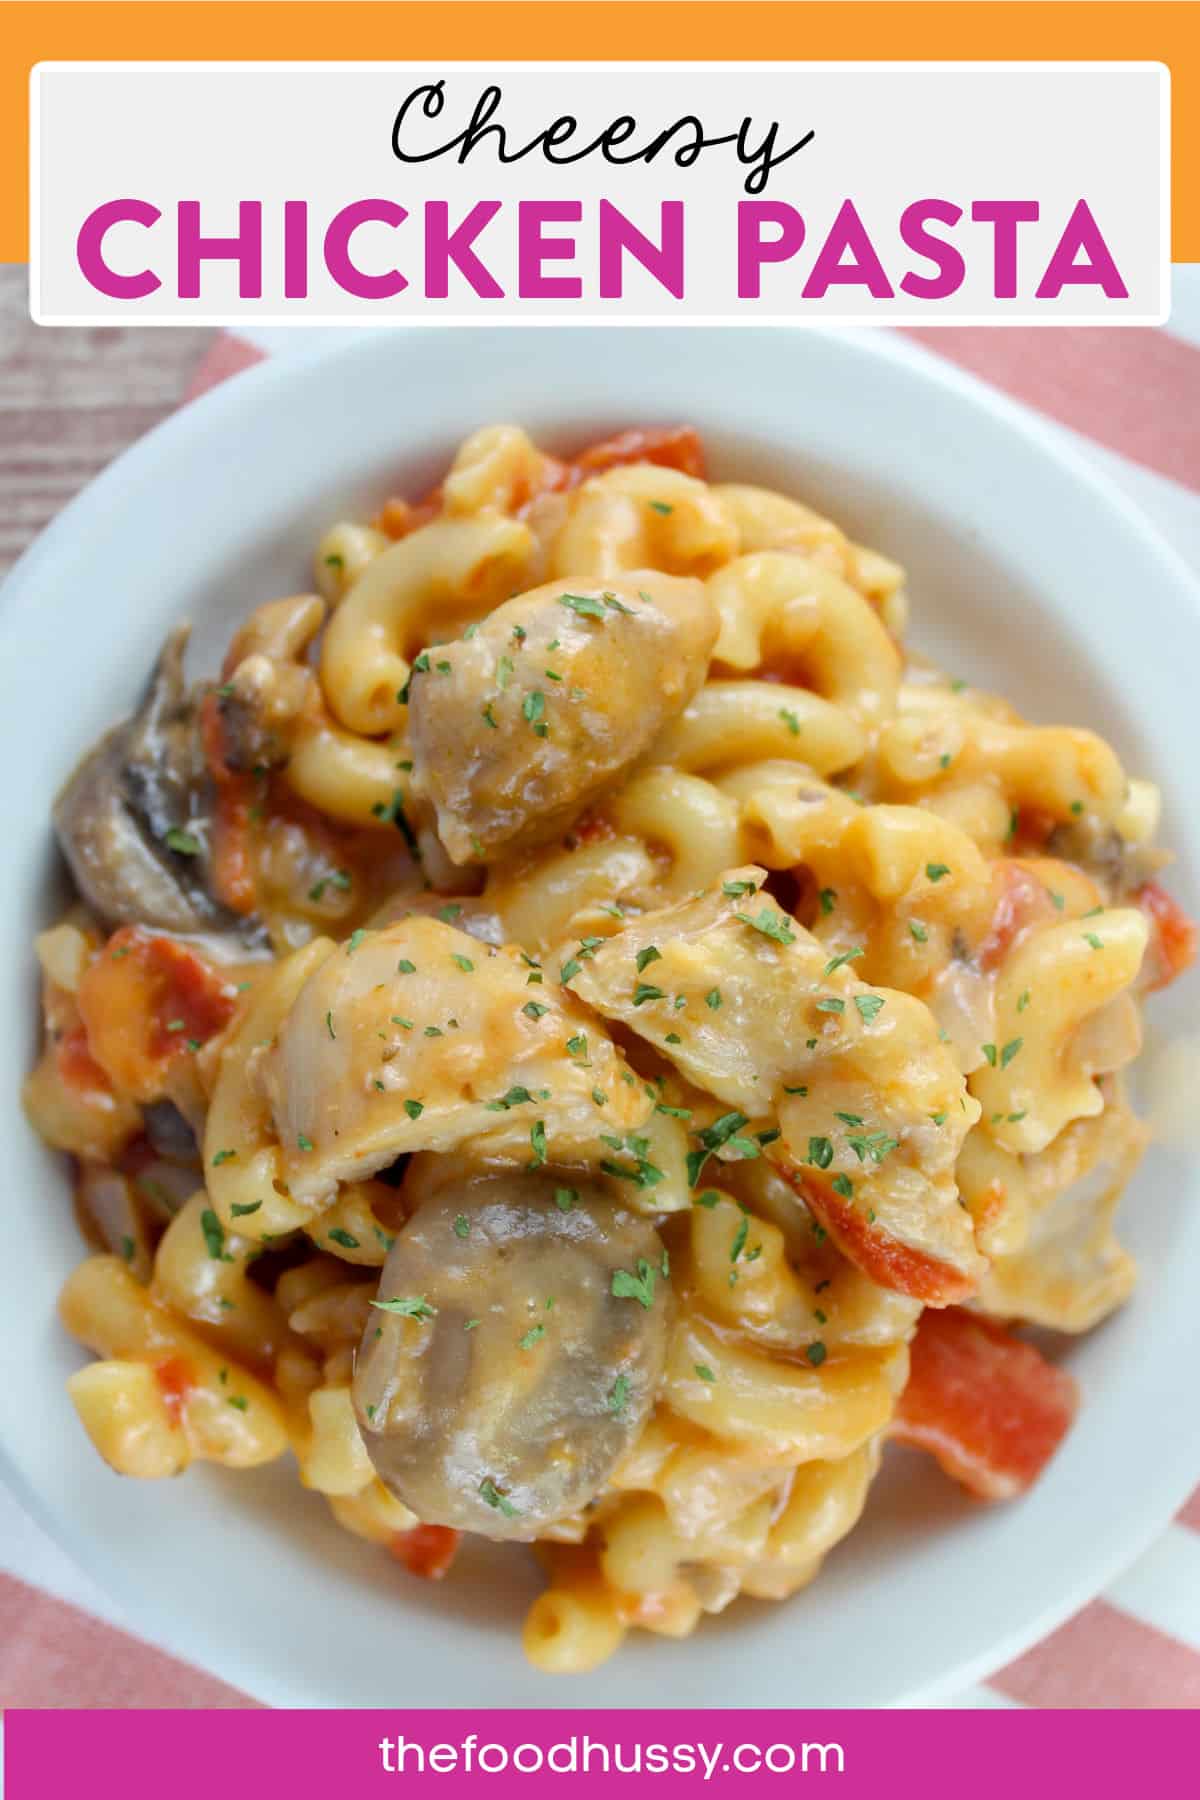 This One Pot Cheesy Chicken Pasta is comfort food at its best!!! Better yet - this meal is ready in less than 25 minutes - from fridge to table! This dish is filled with macaroni, chicken, onions, mushrooms, tomatoes and cheese!!! via @foodhussy